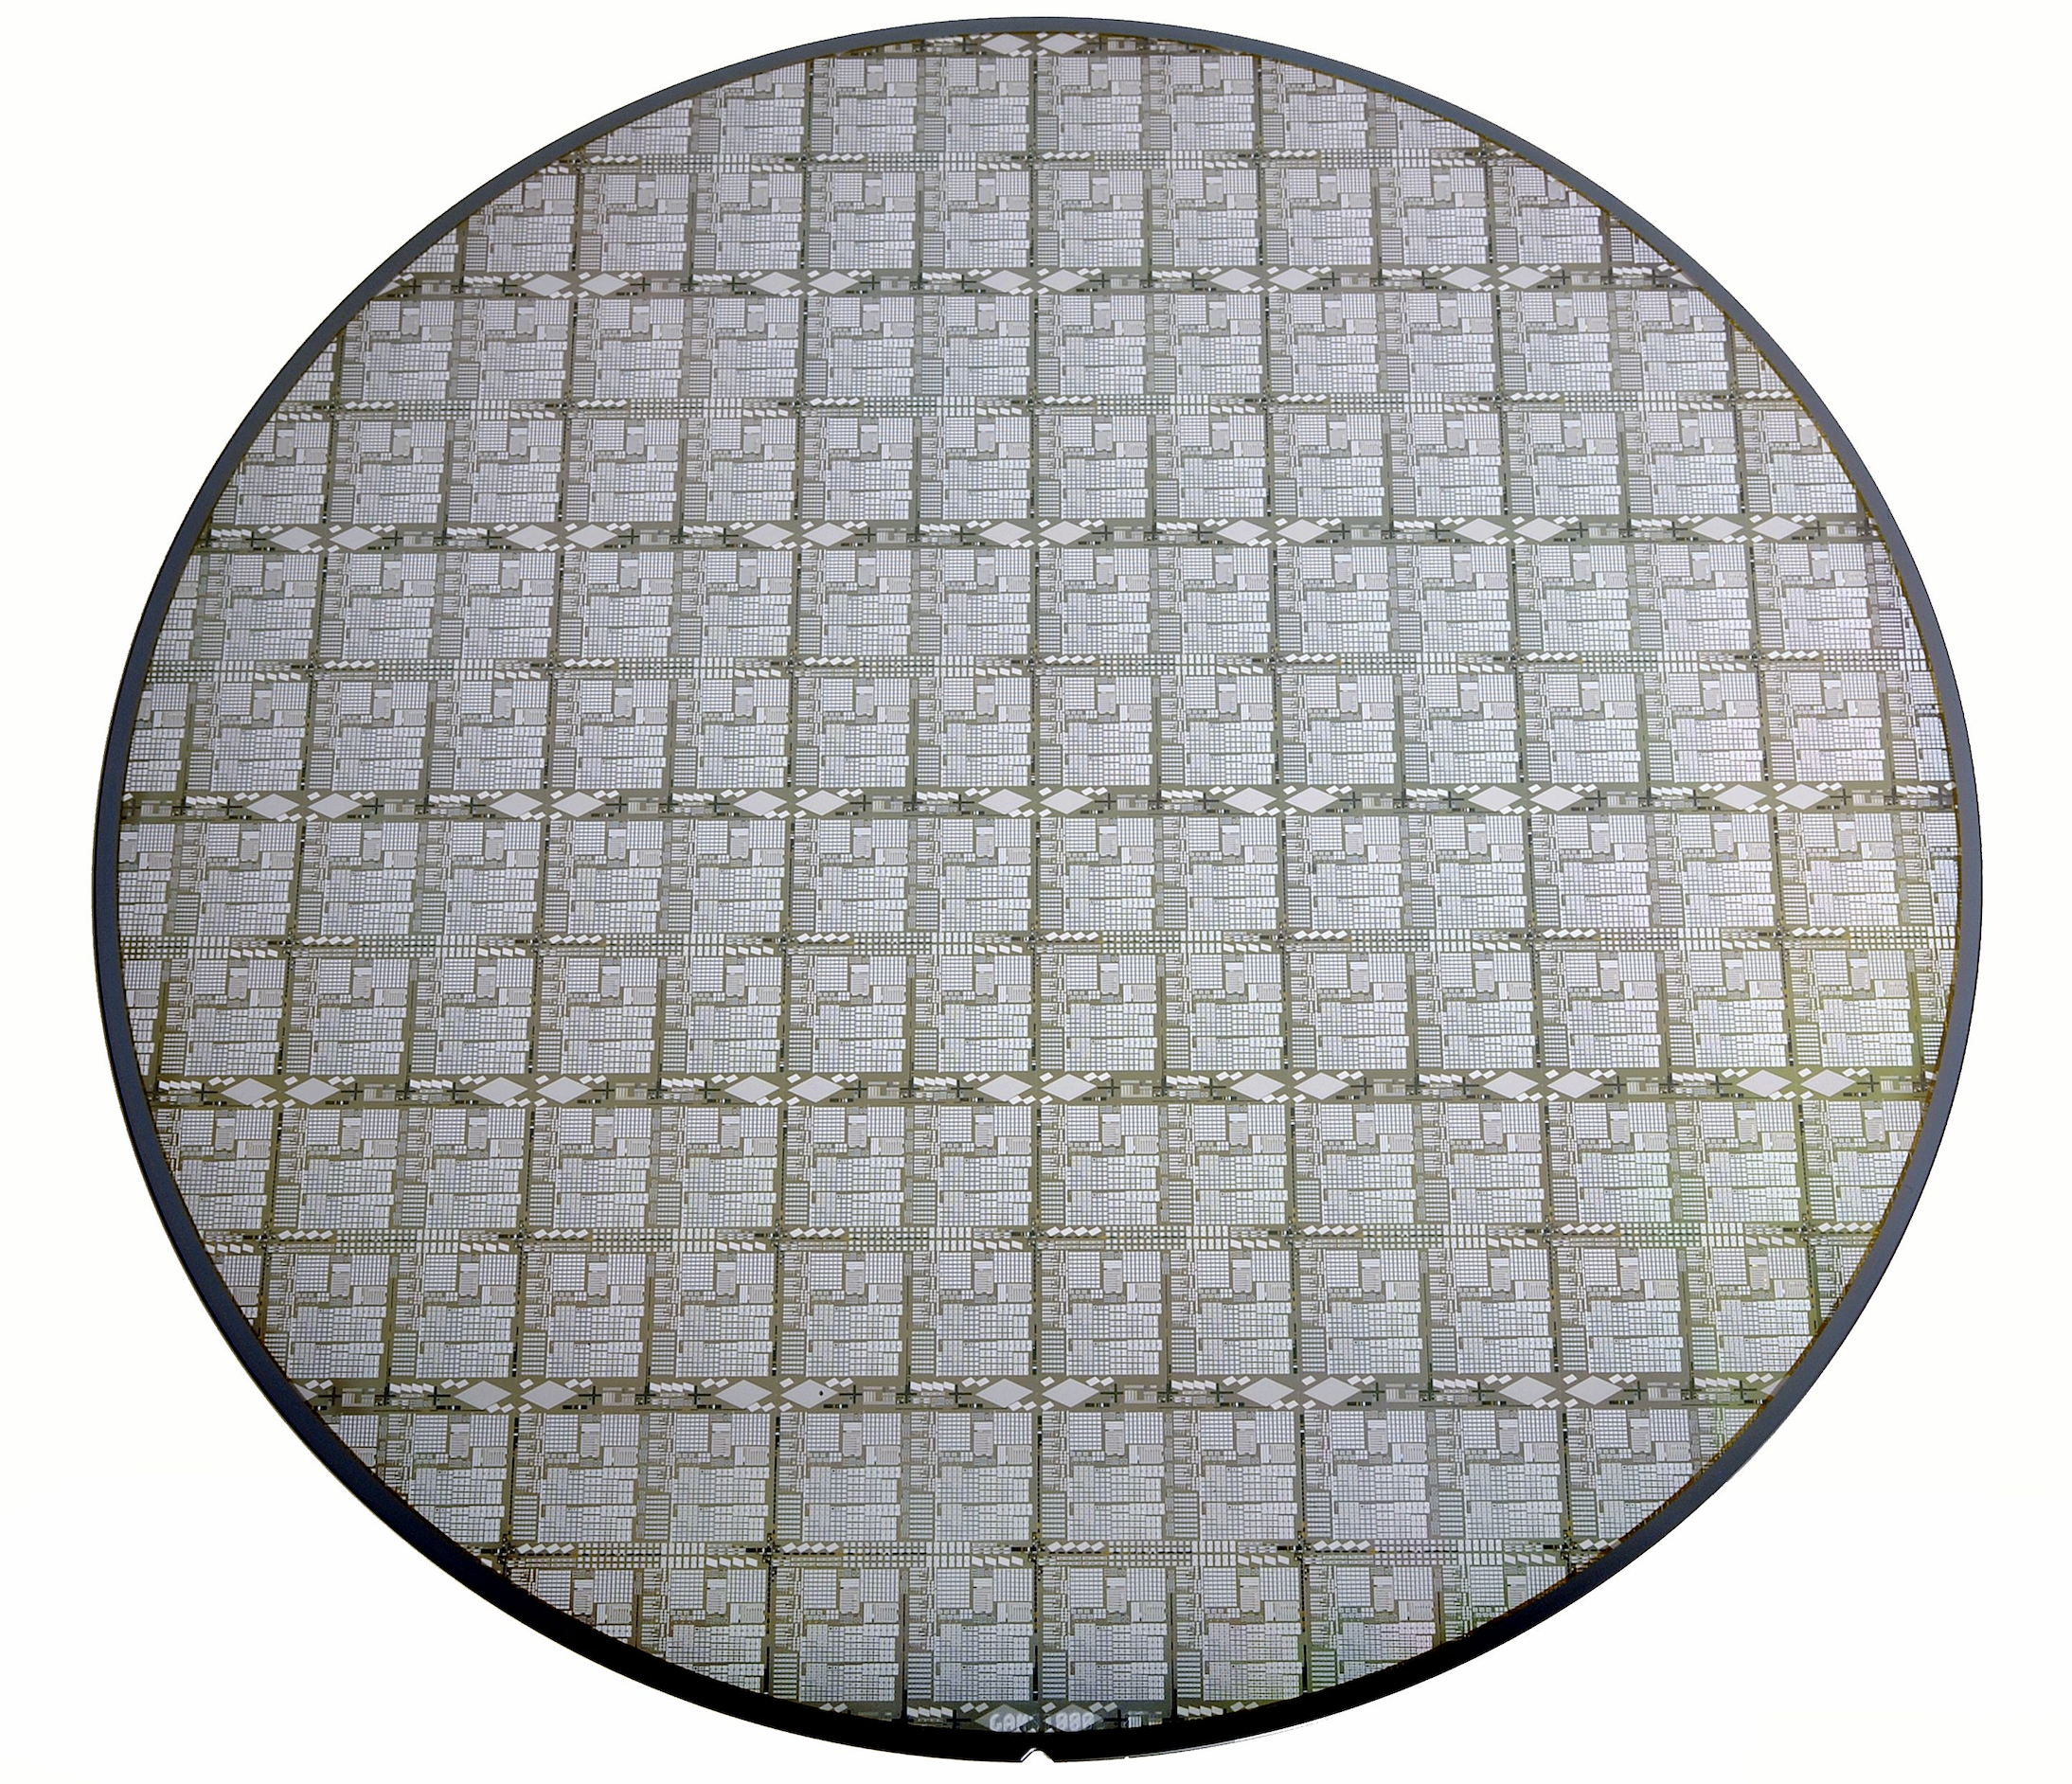  A finished 200-mm-diameter GaN-on-Si wafer. 